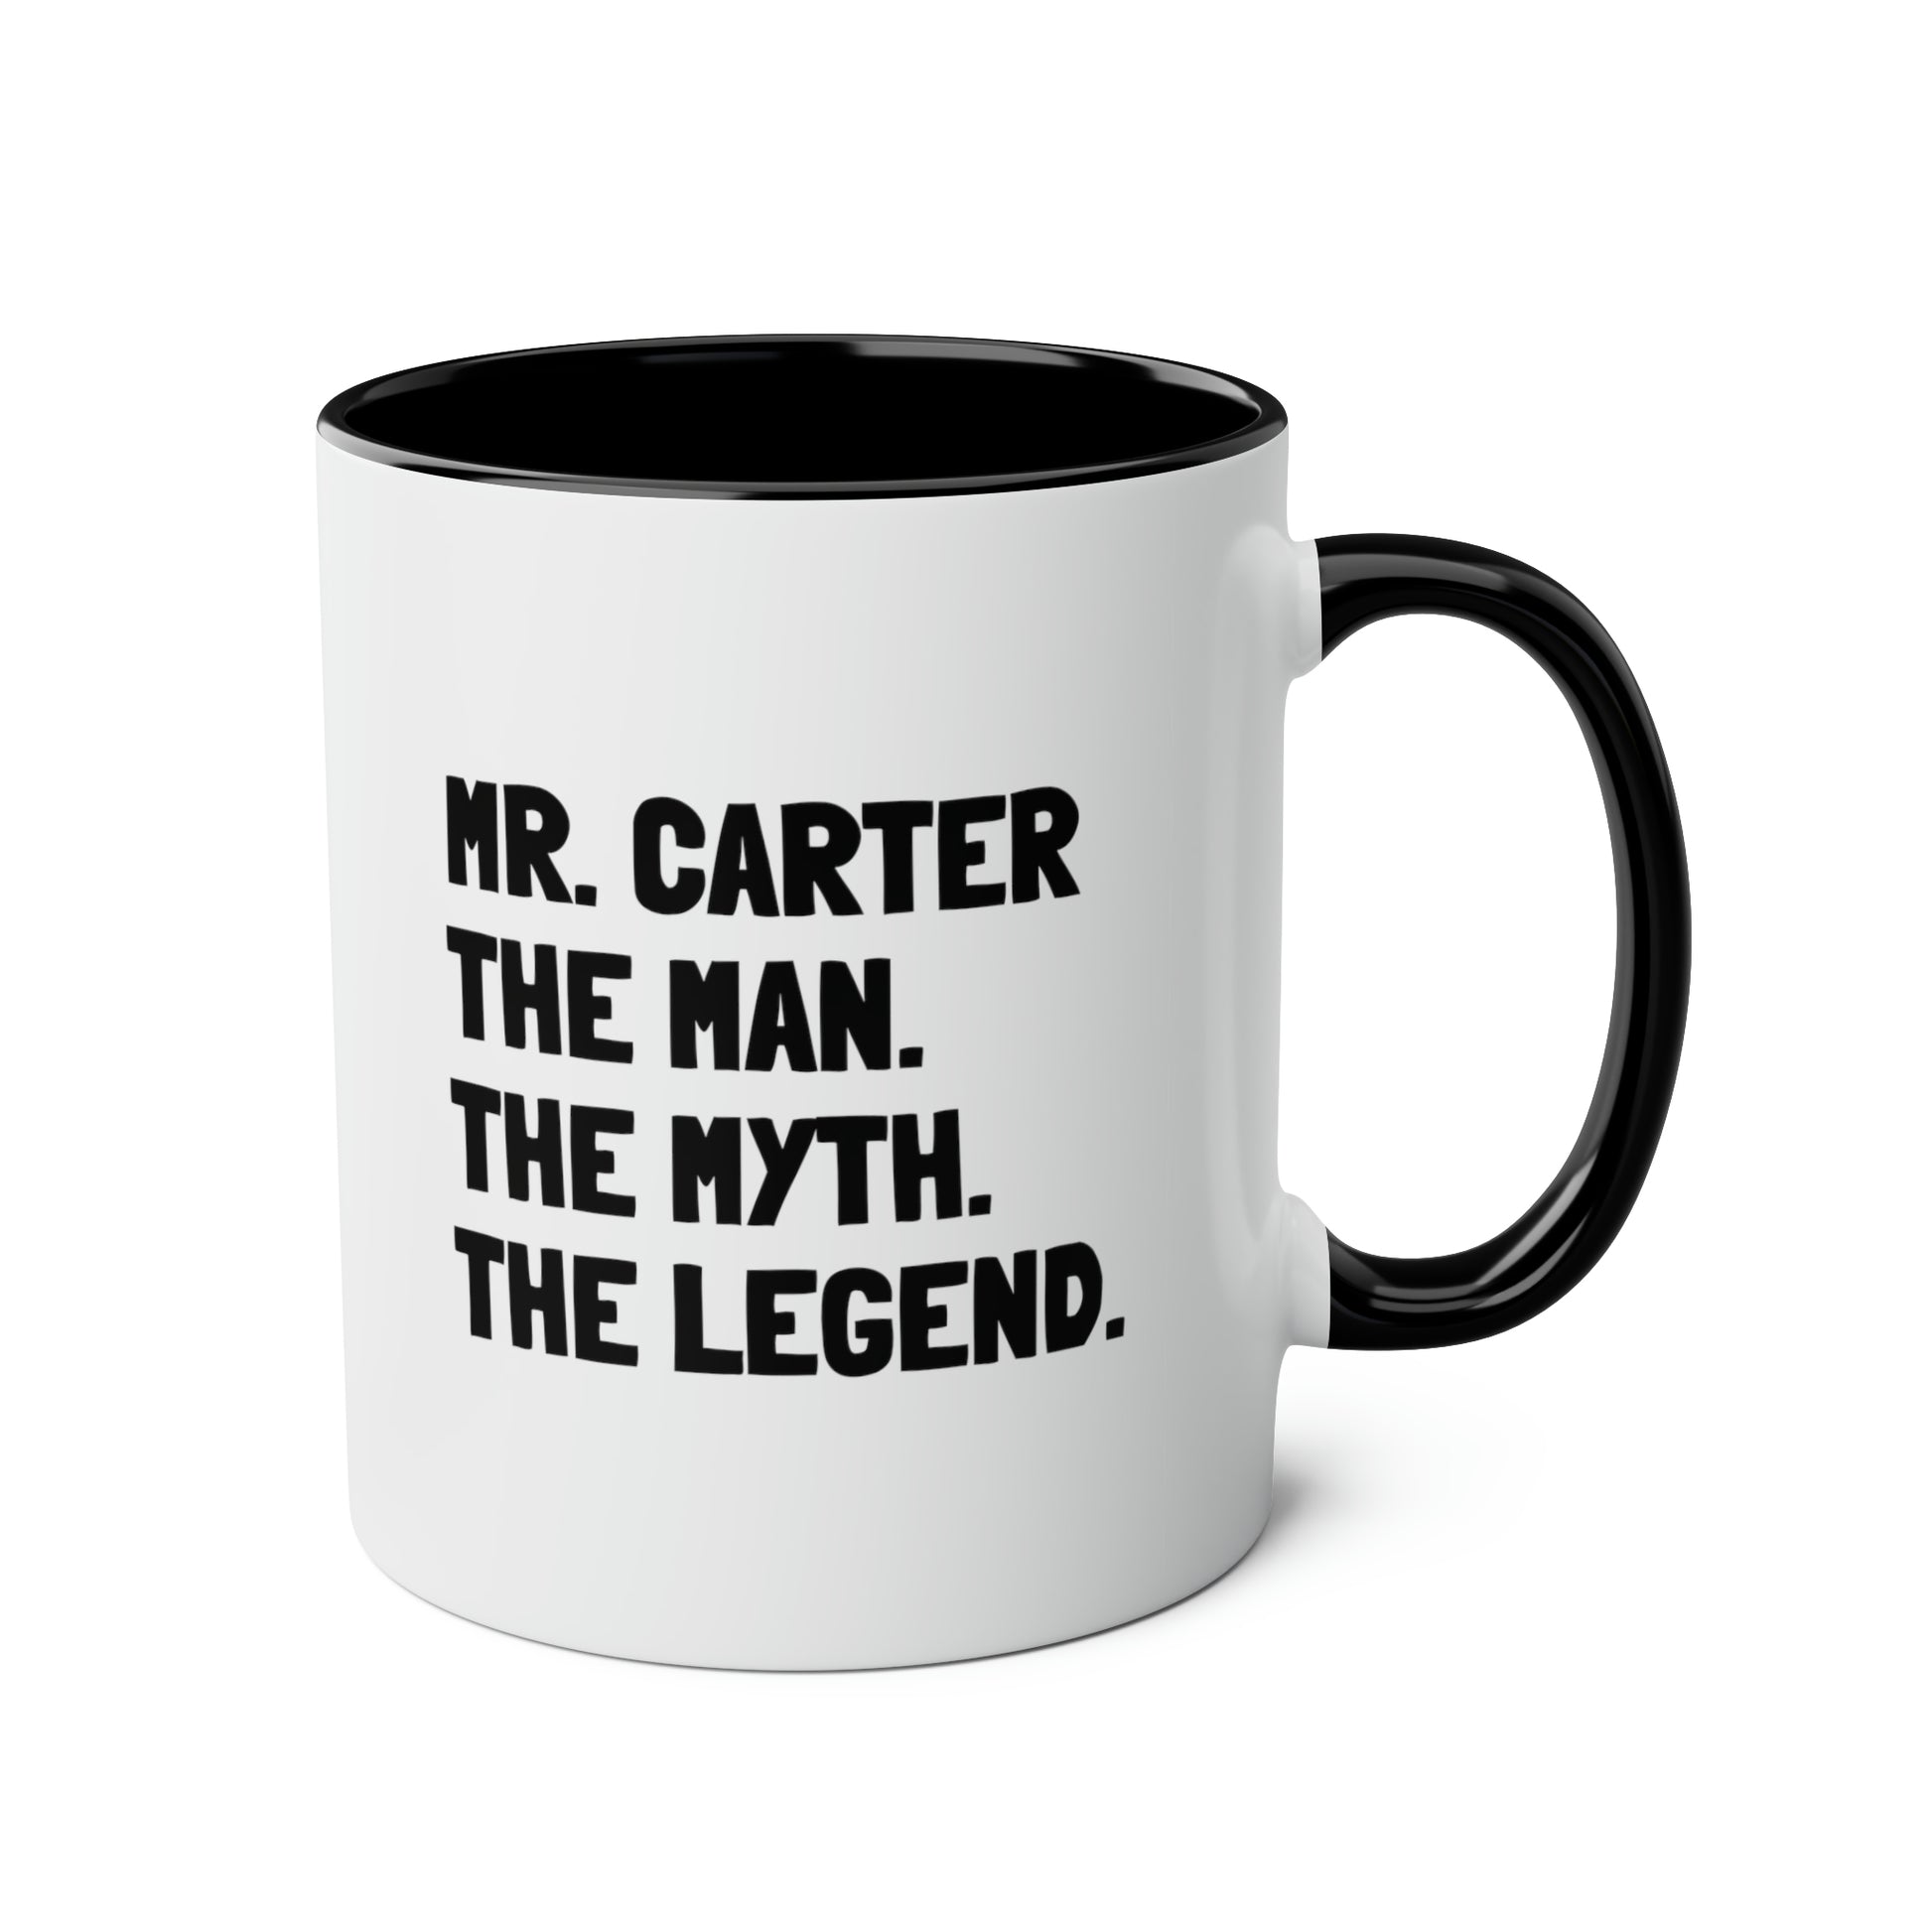 Mr. Carter The Man. The Myth. The Legend. 11oz white with black accent funny large coffee mug gift for male teacher end of year appreciation custom name waveywares wavey wares wavywares wavy wares